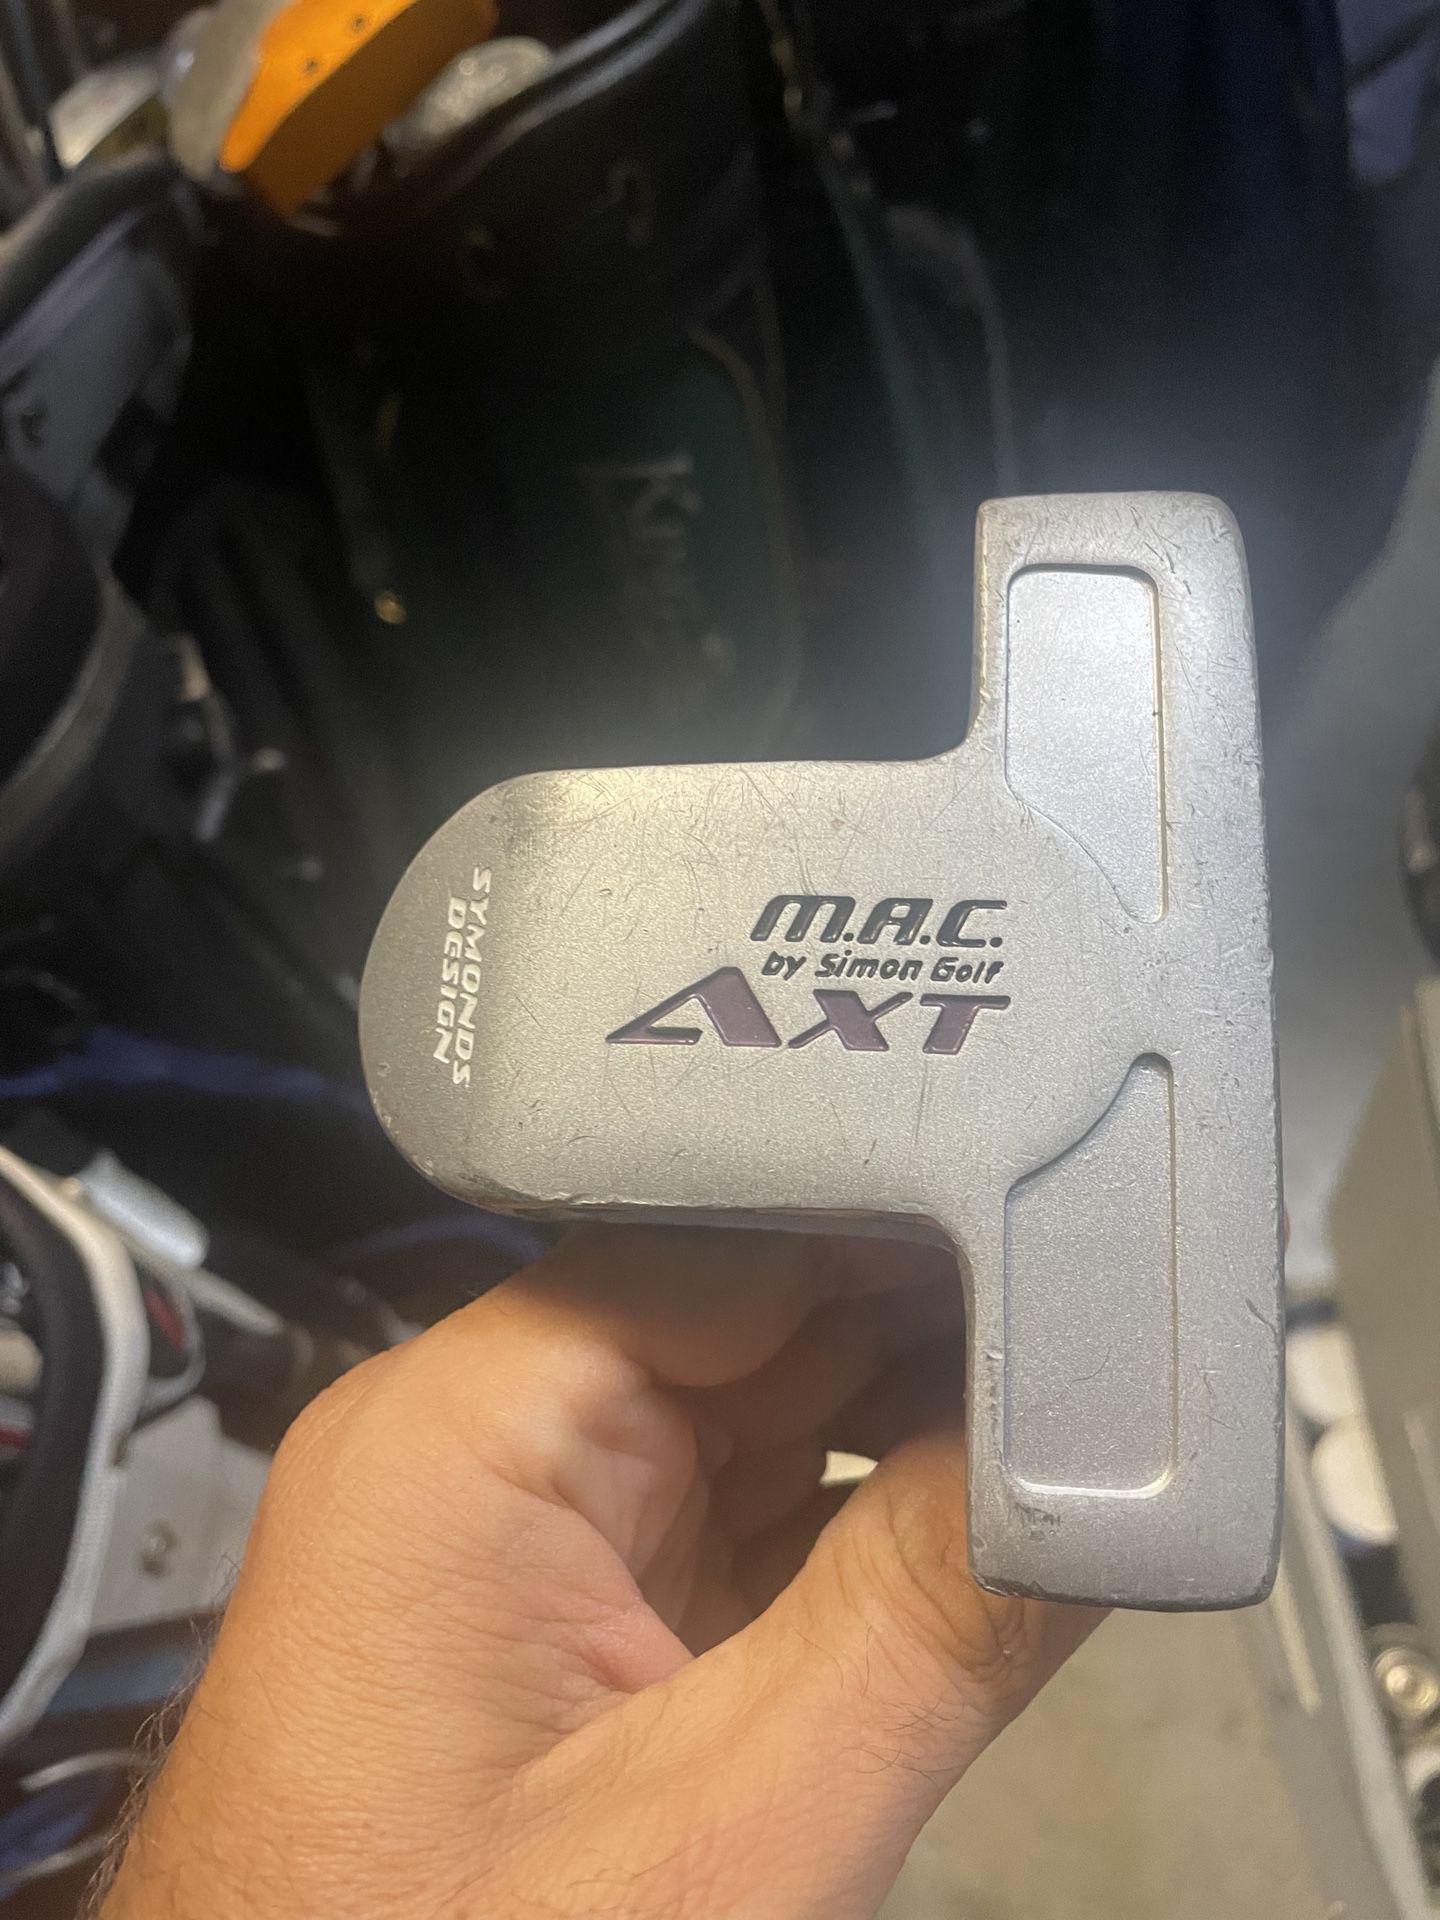 Simon Golf Mac Golf Putter In Right Handed